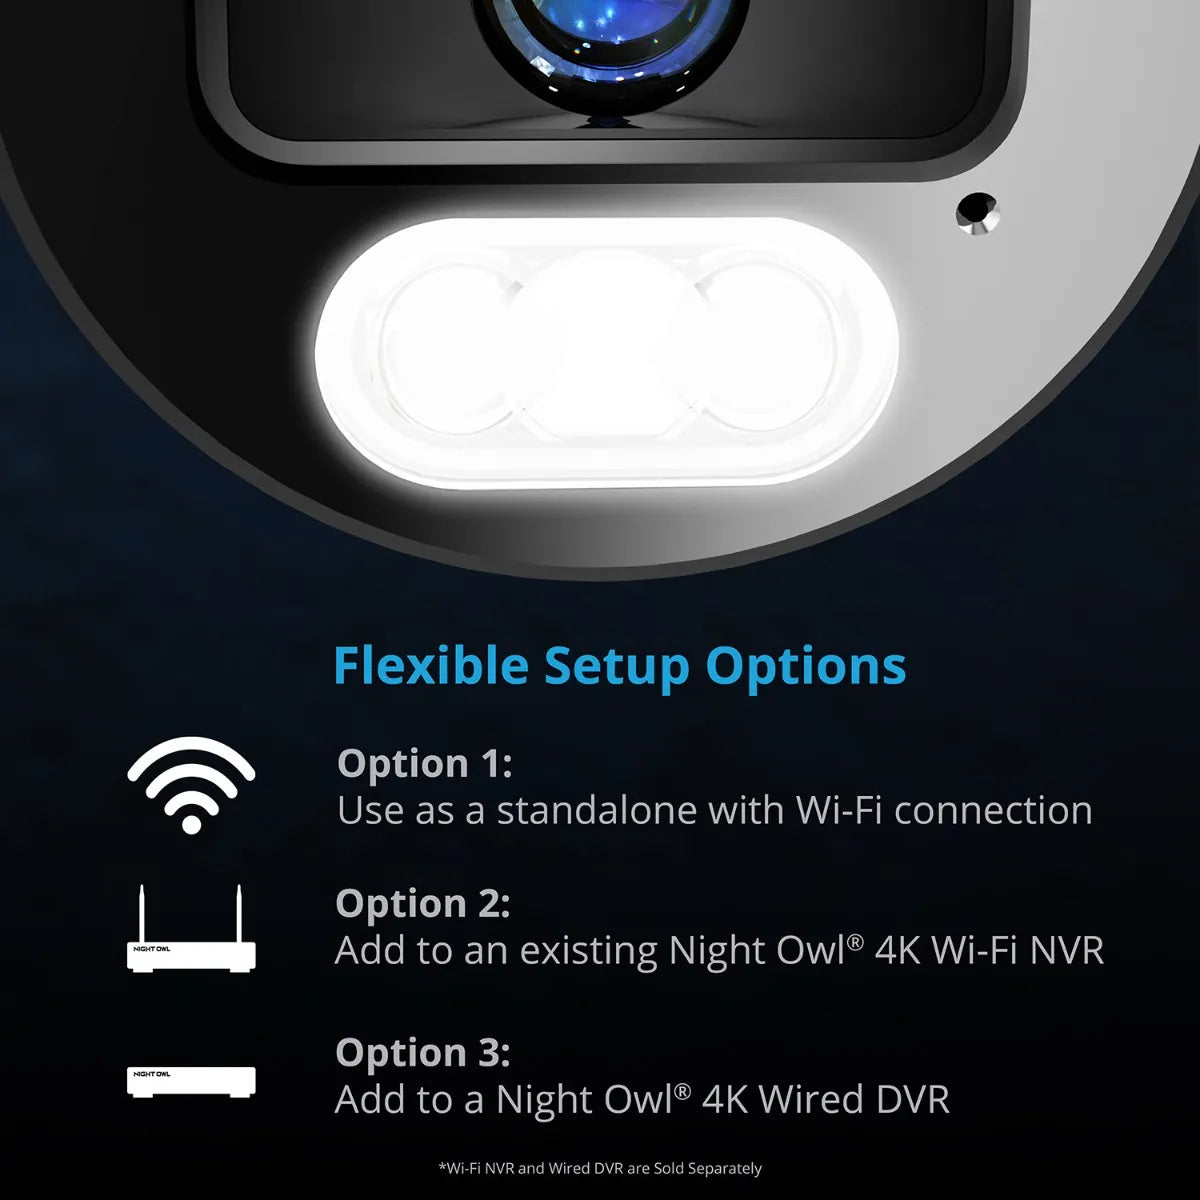 Wi-Fi IP Plug In 4K Spotlight Camera with 2-Way Audio and Audio Alerts and Siren - White